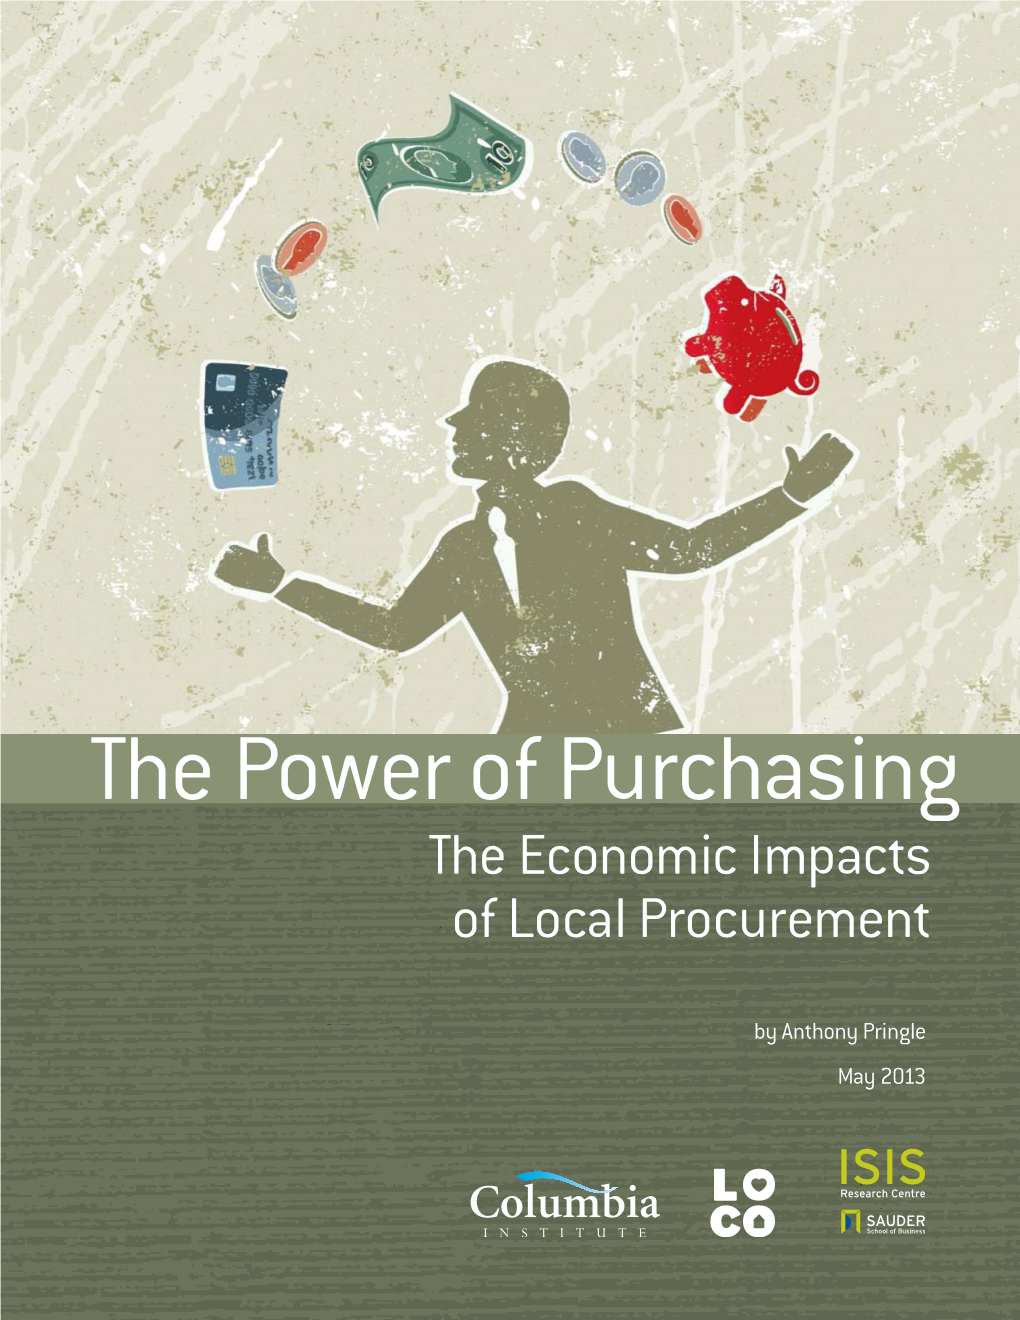 The Power of Purchasing the Economic Impacts of Local Procurement